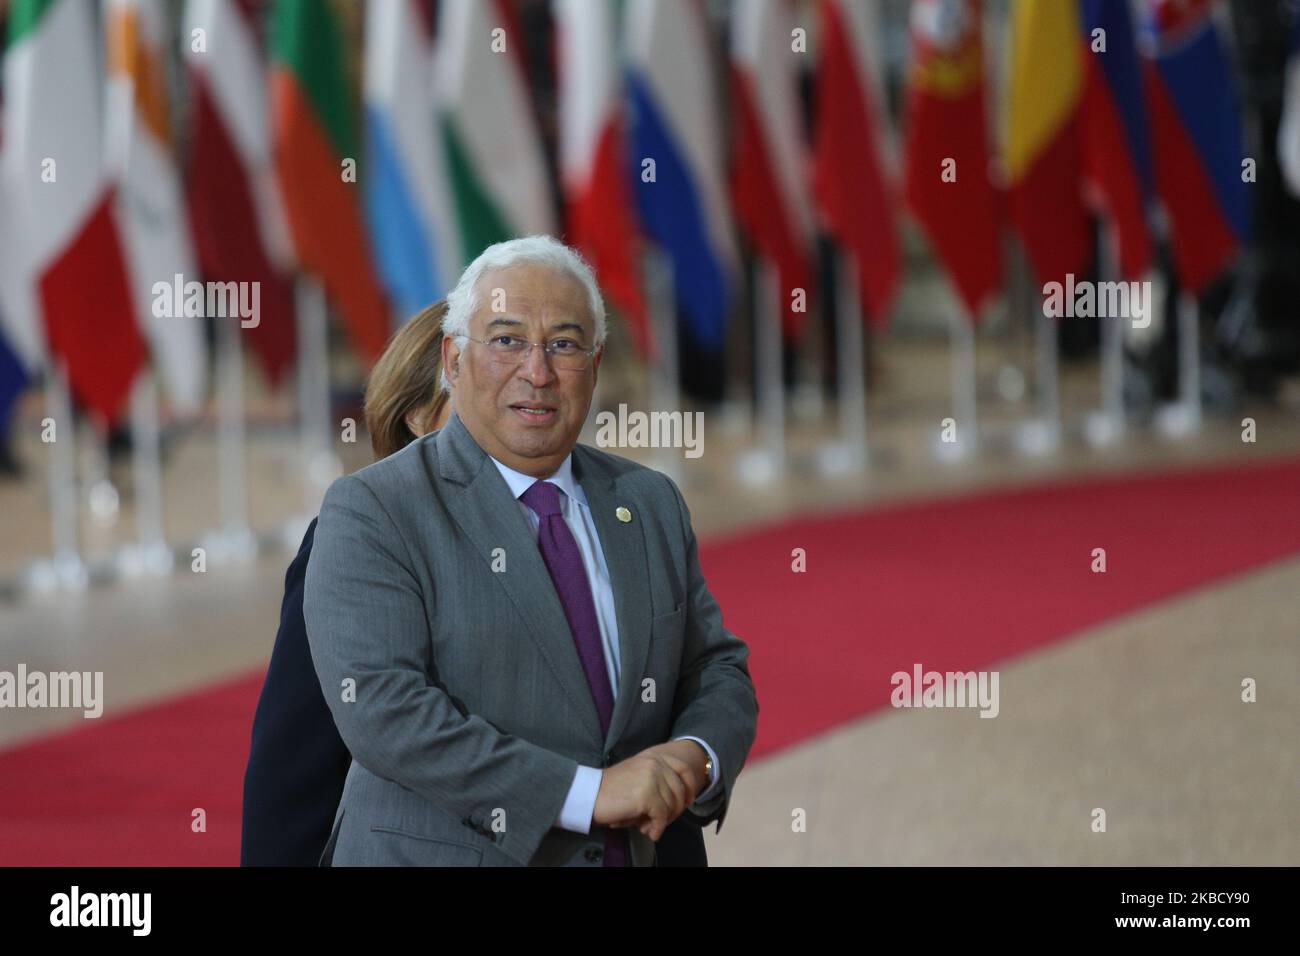 Antonio Costa, the Prime Minister of Portugal arrives on the red carpet with the flags in the background, at the European Council - Euro Summit - EU leaders meeting, in the Forum Europa Building, headquarters of EU. Brussels, Belgium - December 12, 2019 (Photo by Nicolas Economou/NurPhoto) Stock Photo